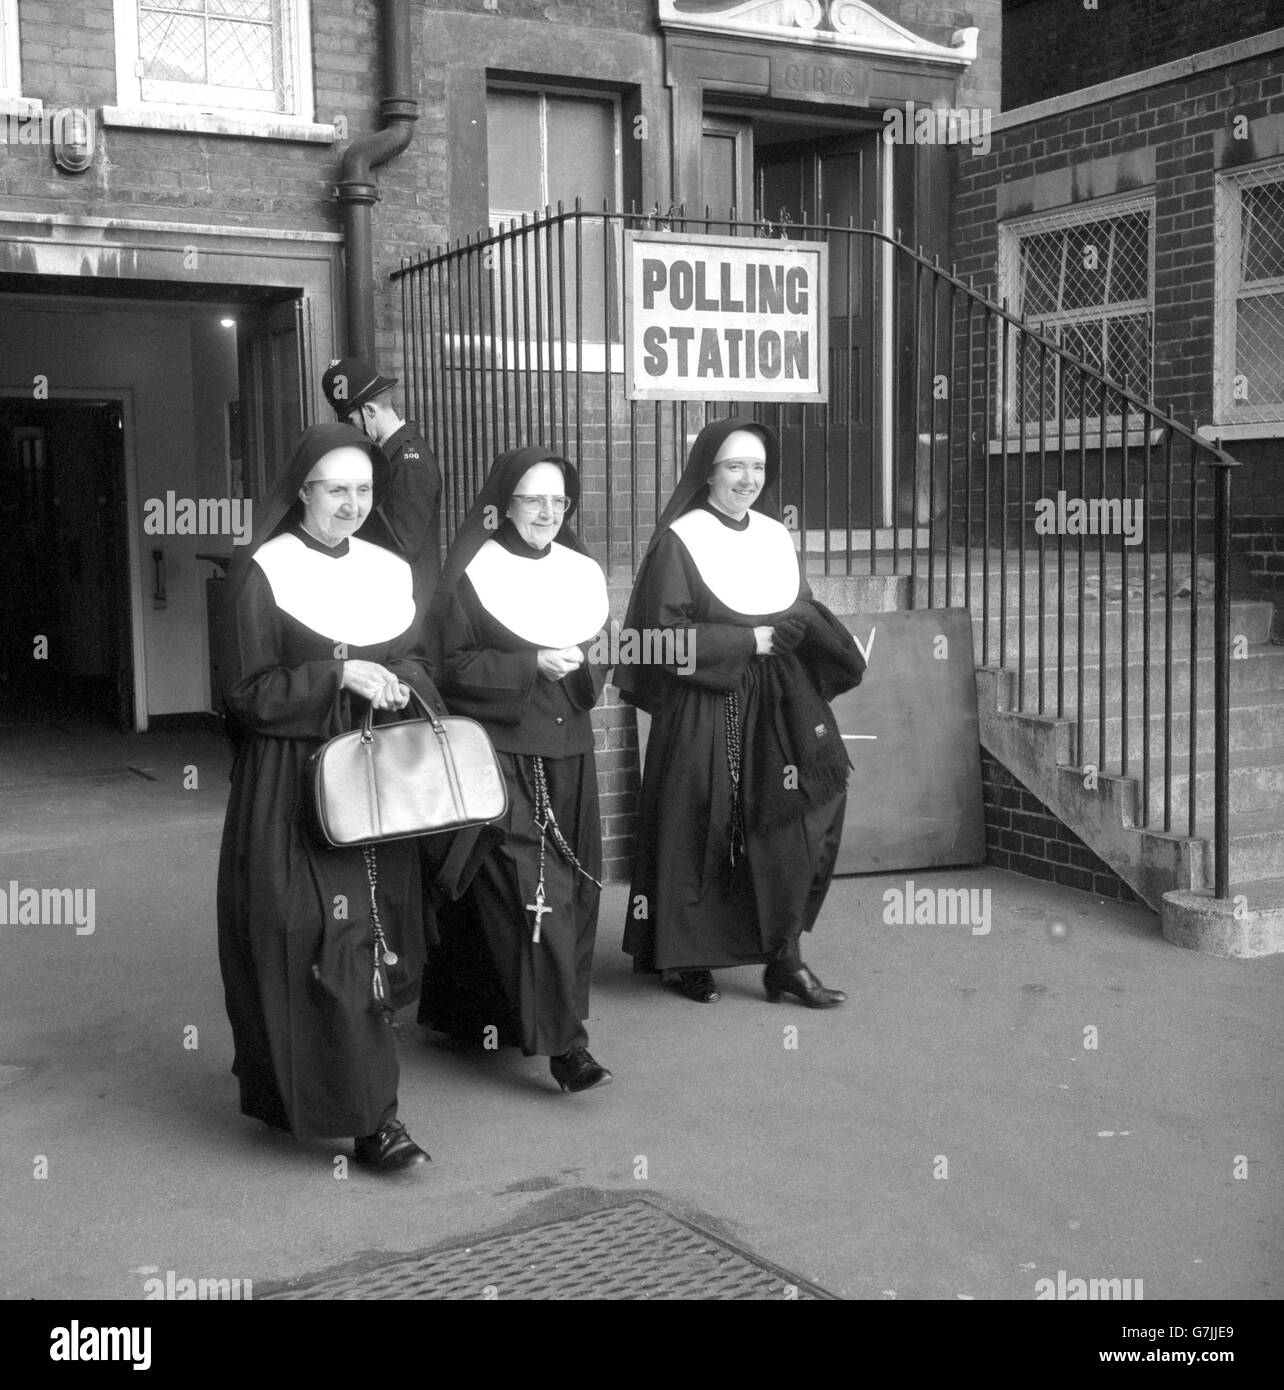 Nuns from the Convent of Notre Dame leave the Charlotte Sharman School in Southwark after voting in the General Election. Stock Photo